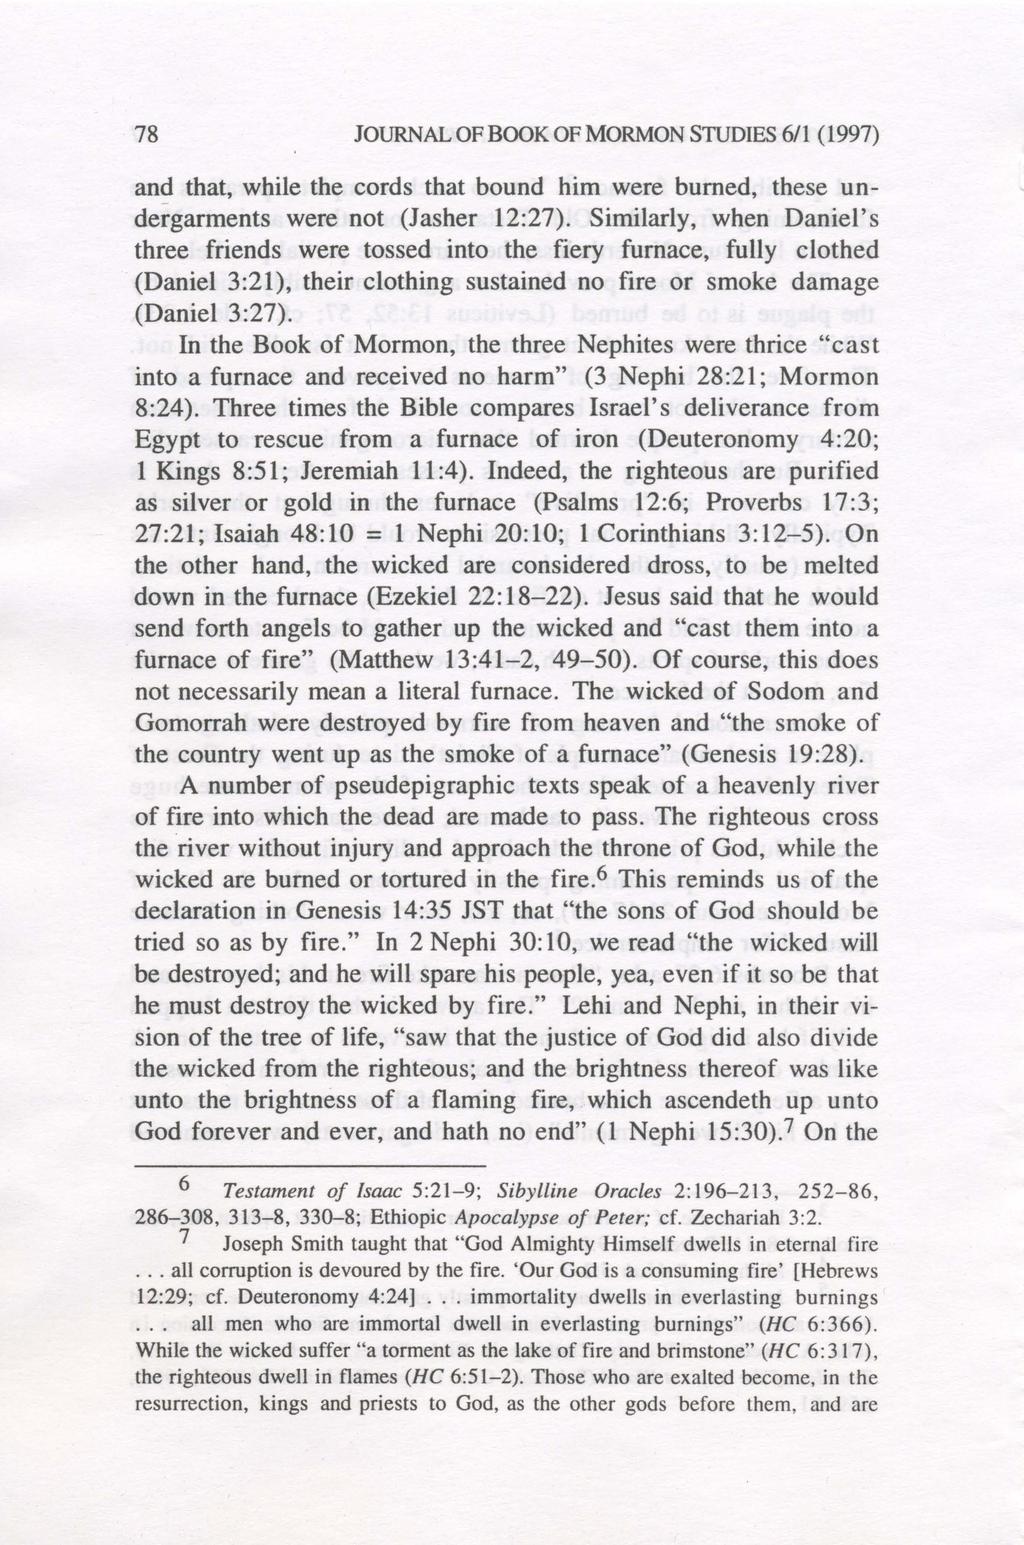 78 JOURNAL OF BOOK OF MORMON STUDIES 6/1 (1997) and that, while the cords that bound him were burned, these undergarments were not (lasher 12:27).